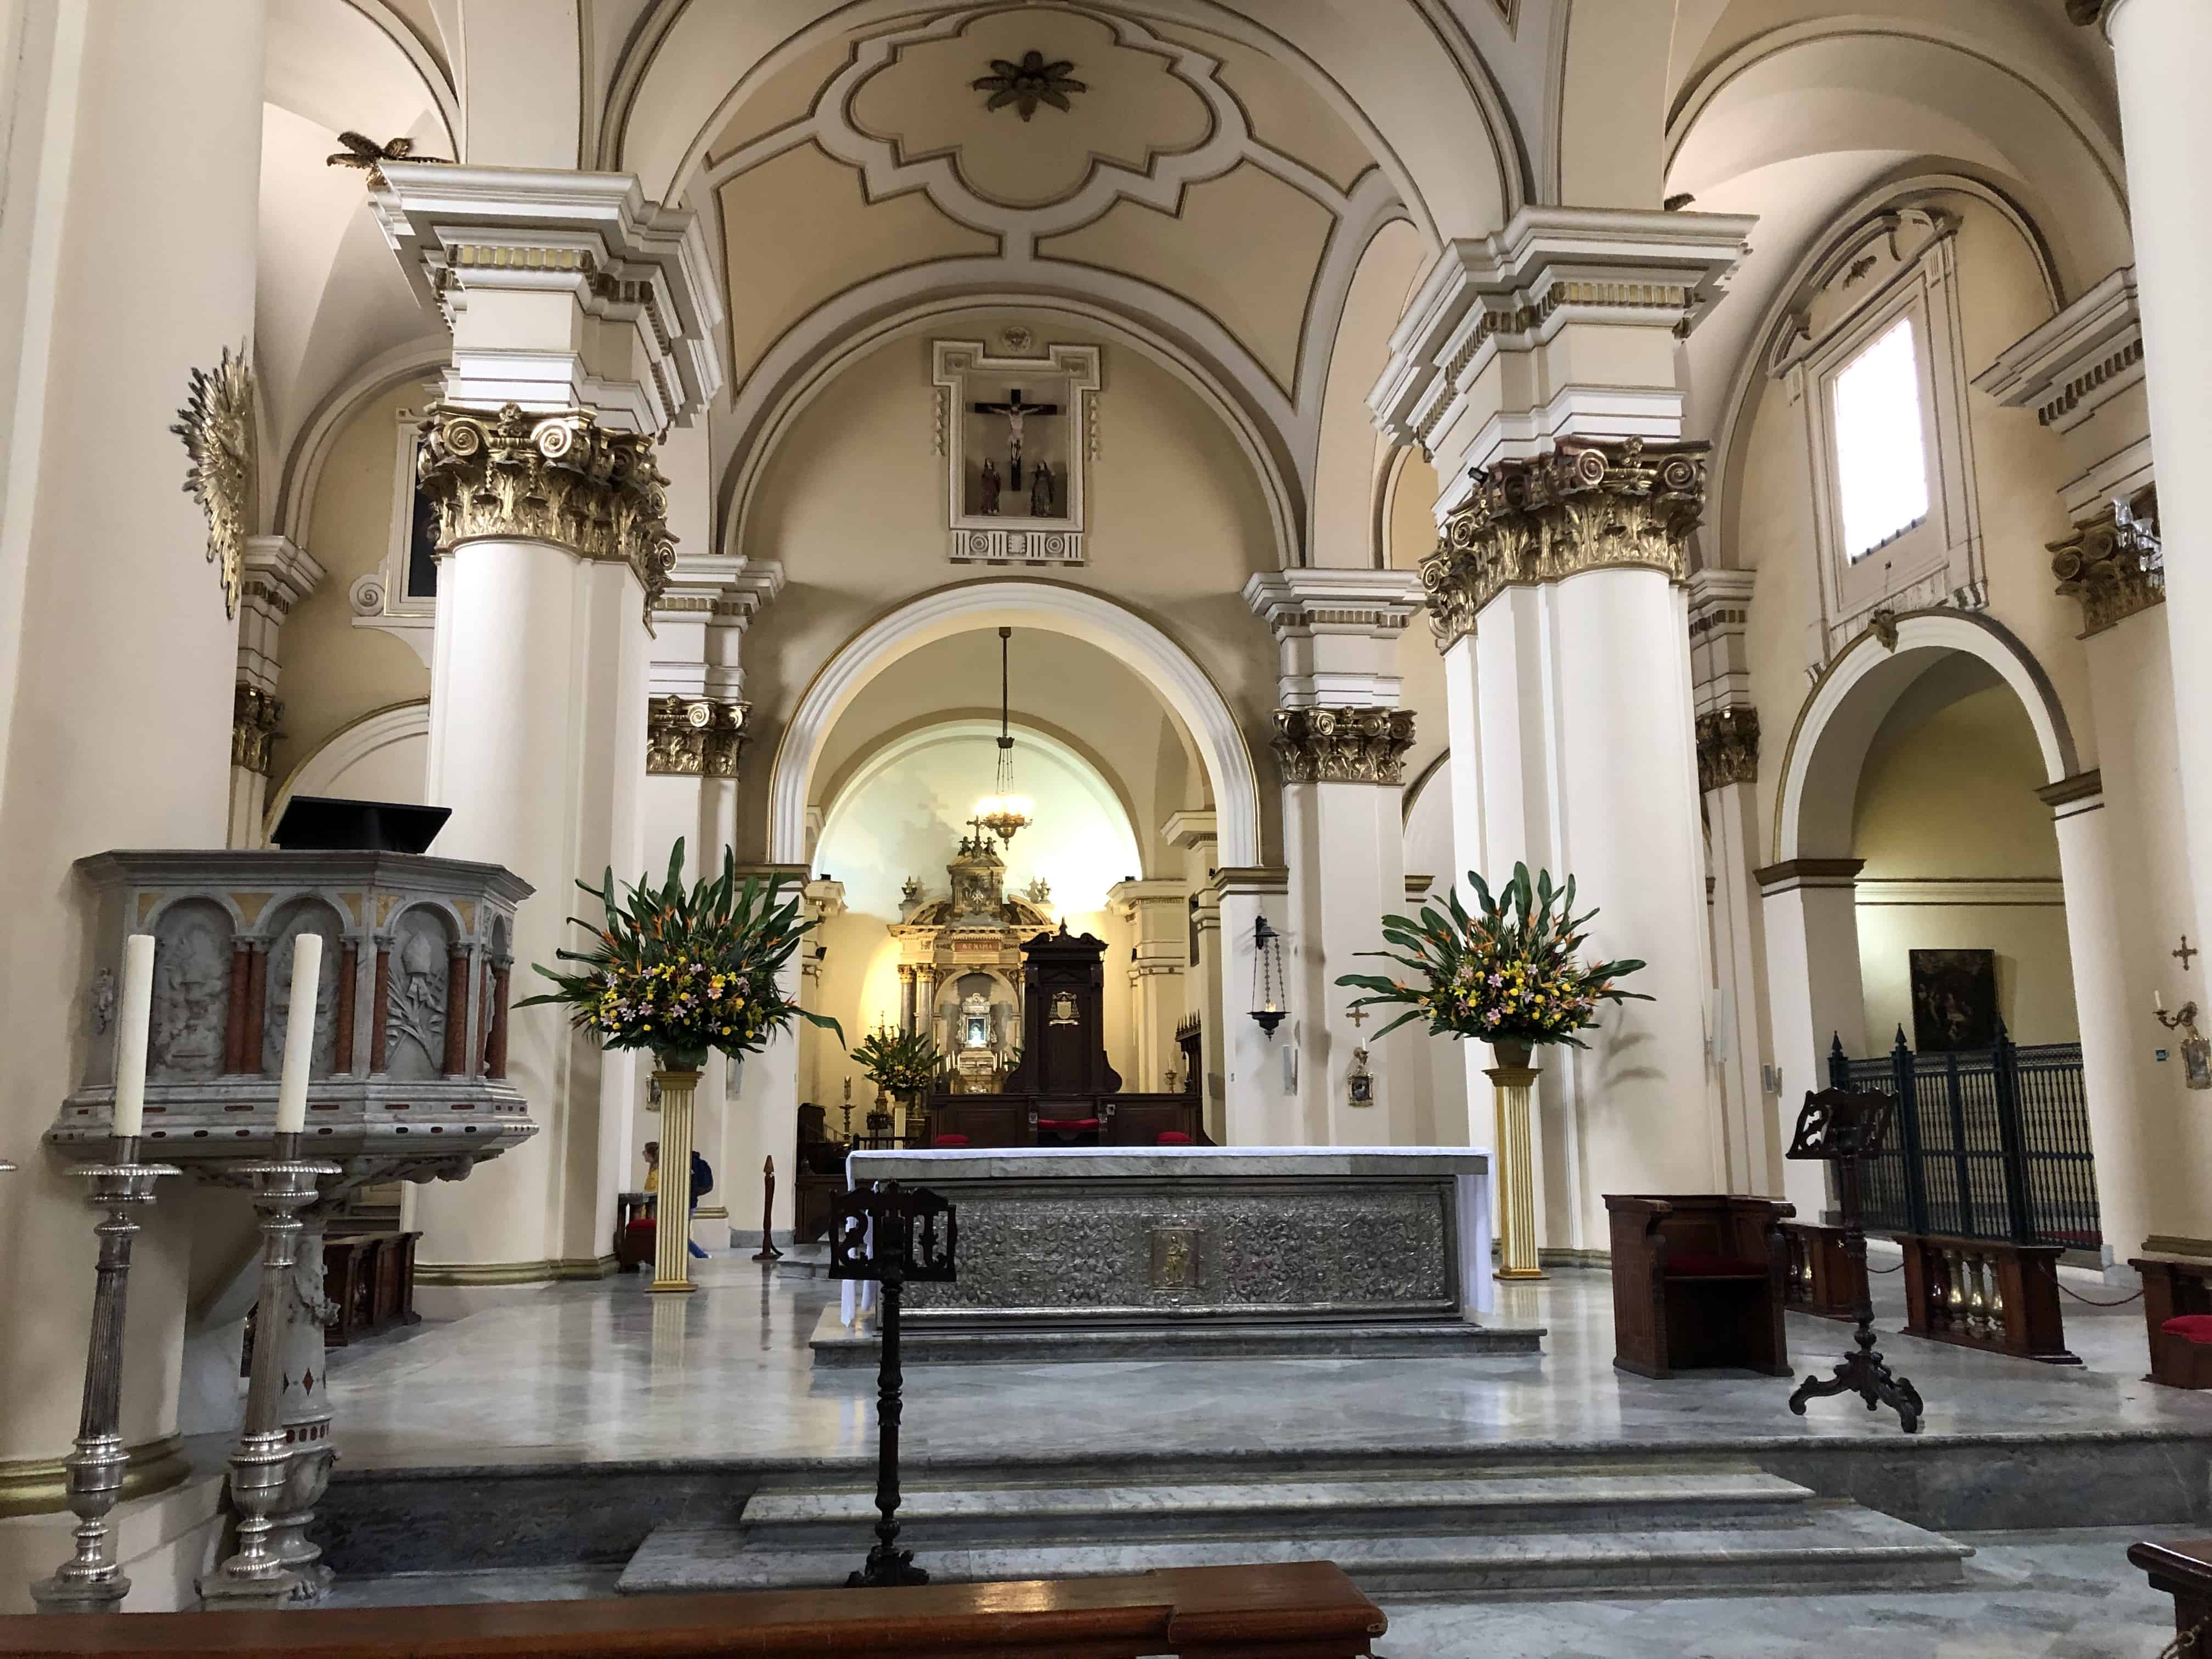 Main altar in the Cathedral of Bogotá